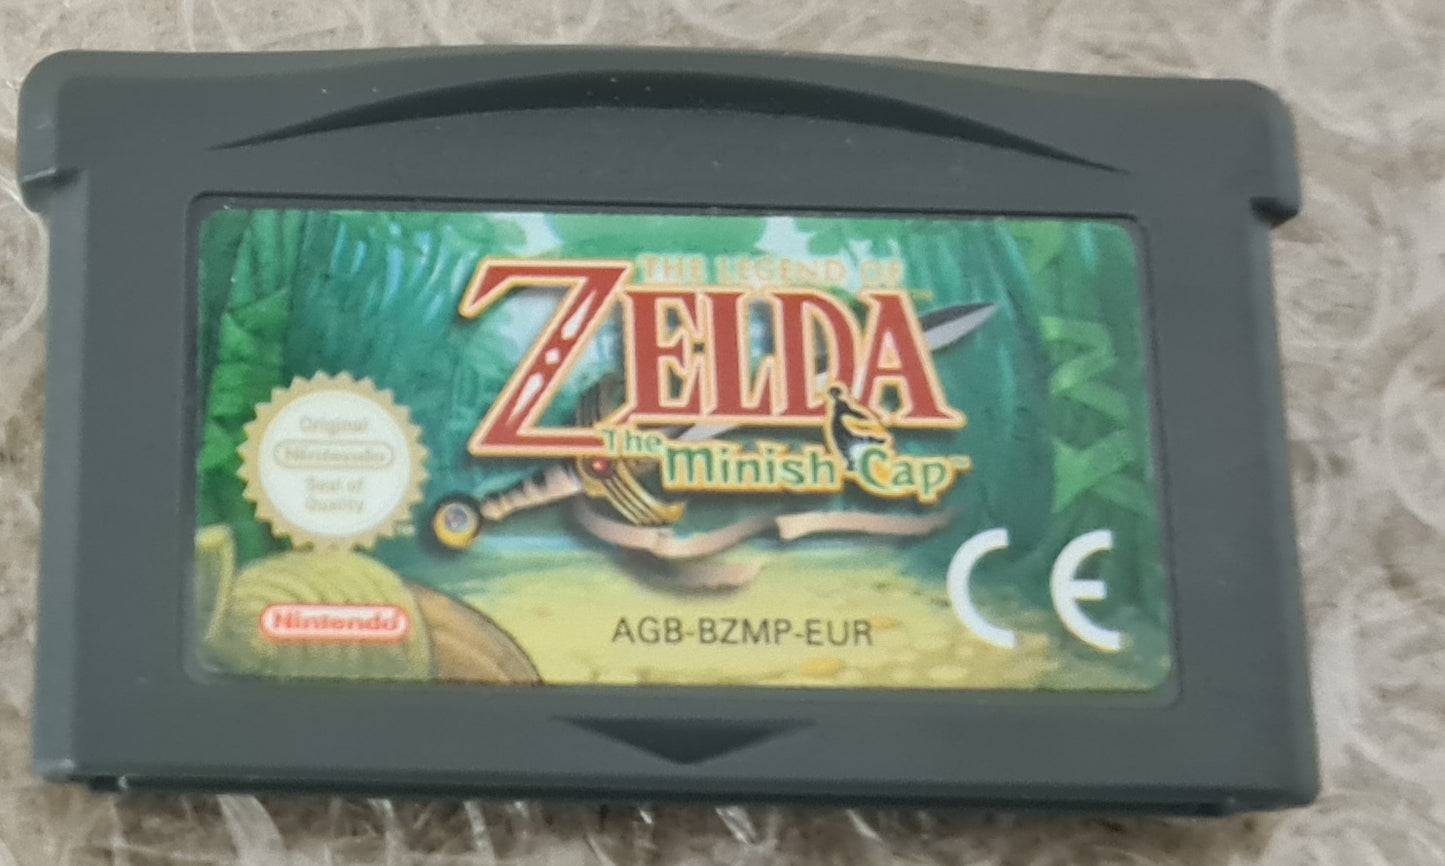 The Legend of Zelda the Minish Cap Nintendo Game Boy Advance Game Cartridge Only